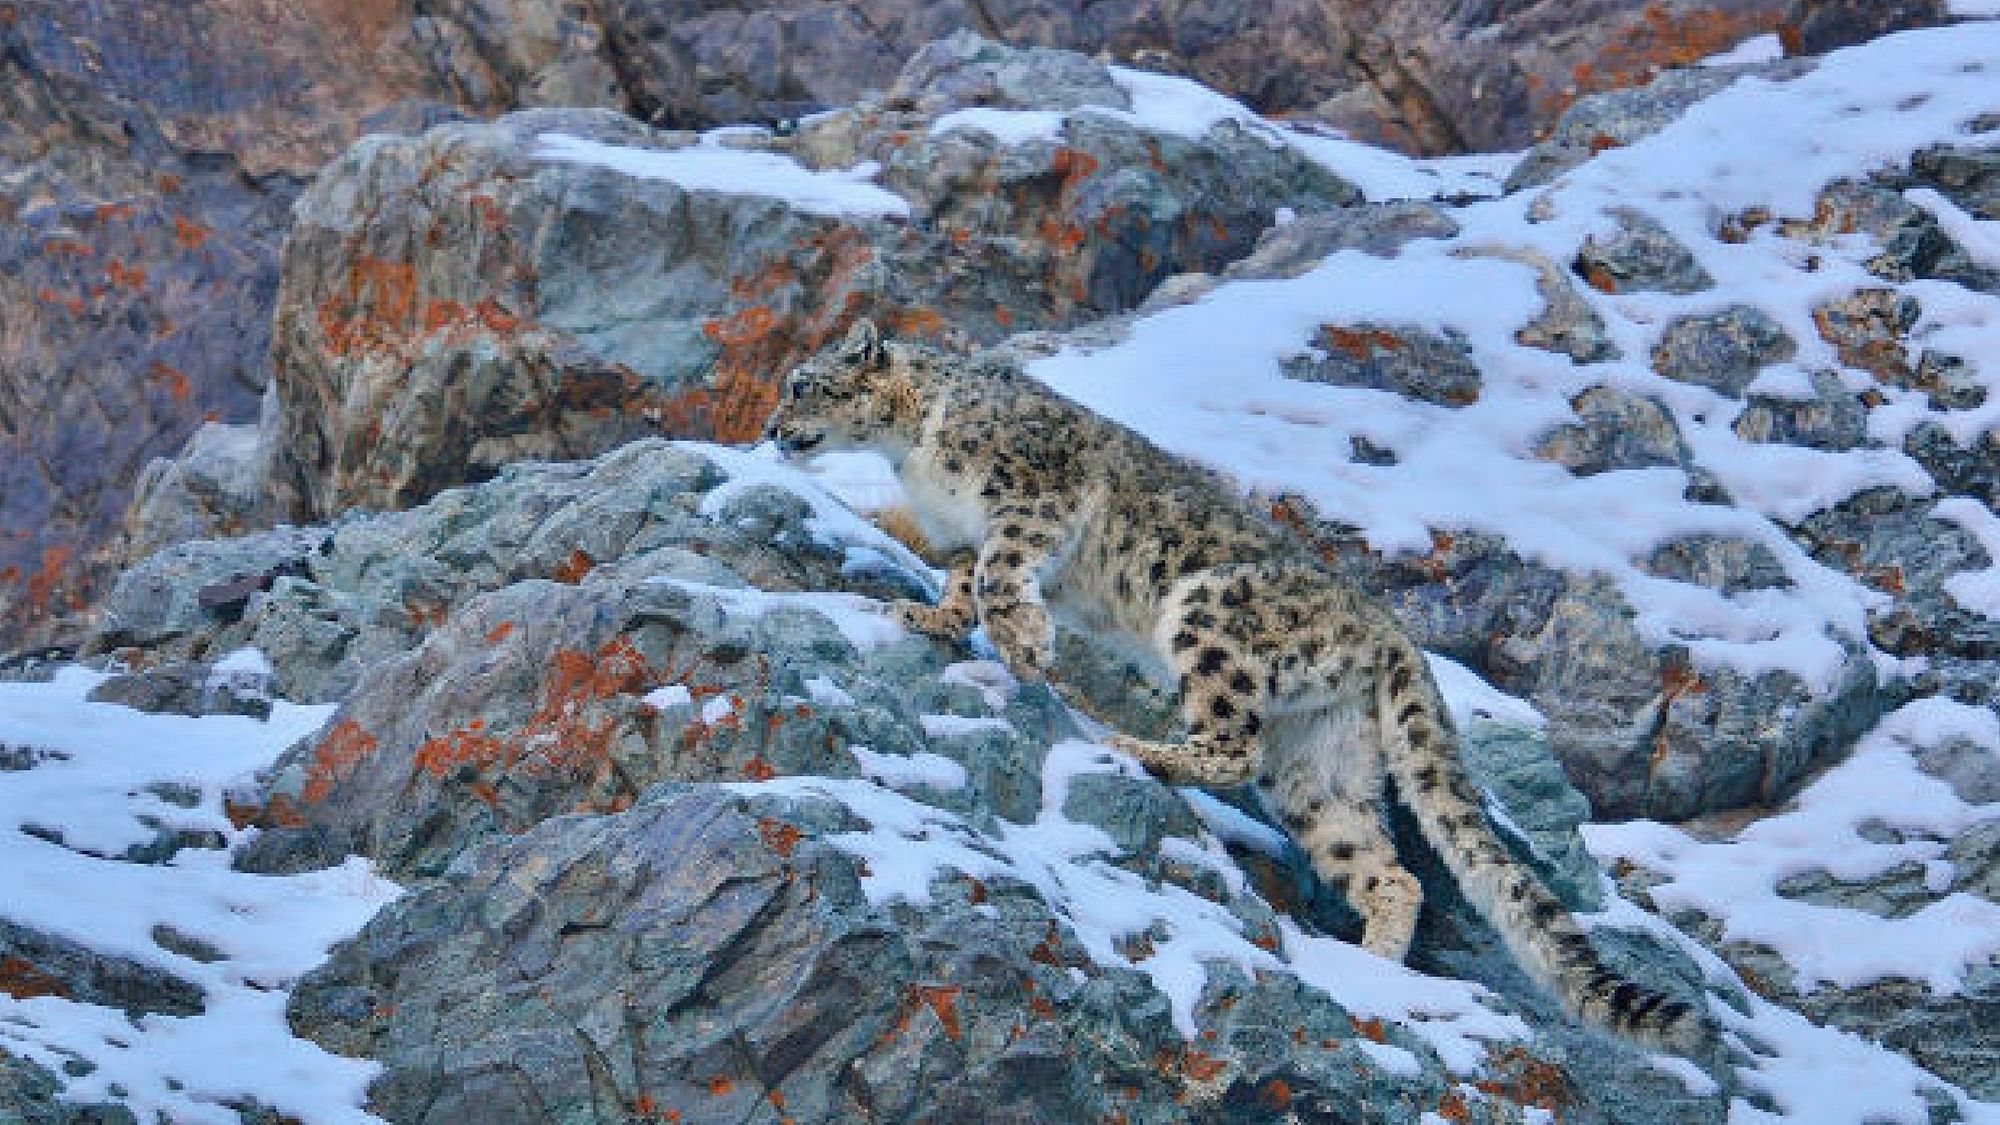 Snow leopard (Panthera uncia) walking on rocky slopes in Hemis national park, Ladakh, India. The photograph was taken in February 2014.